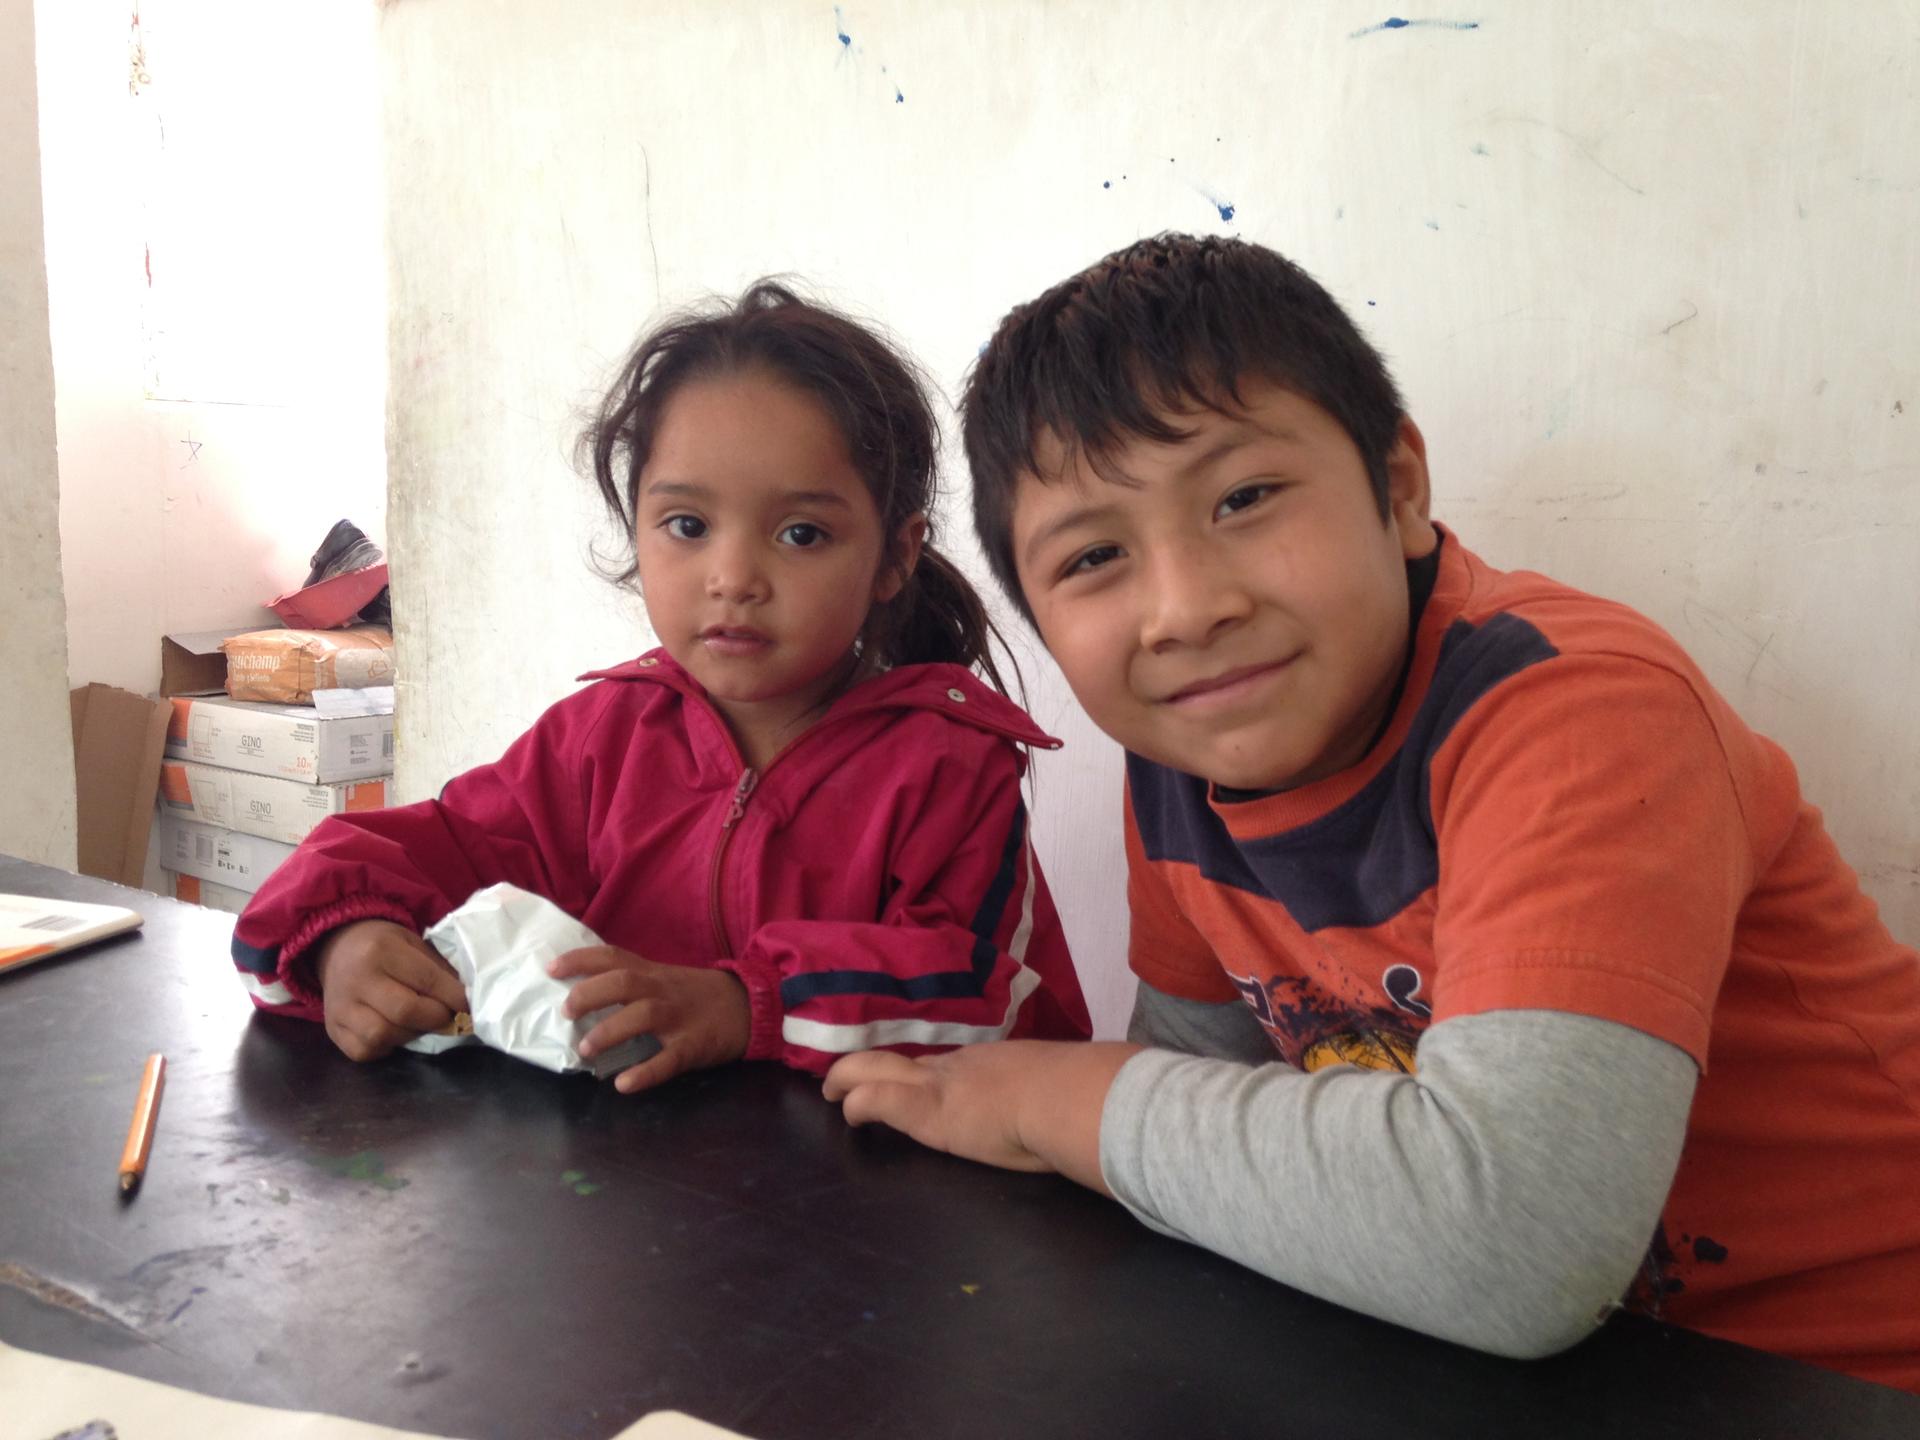 In the Mexican border city of Ciudad Juárez, children visit the new Los Soles study center in the city’s outskirts.